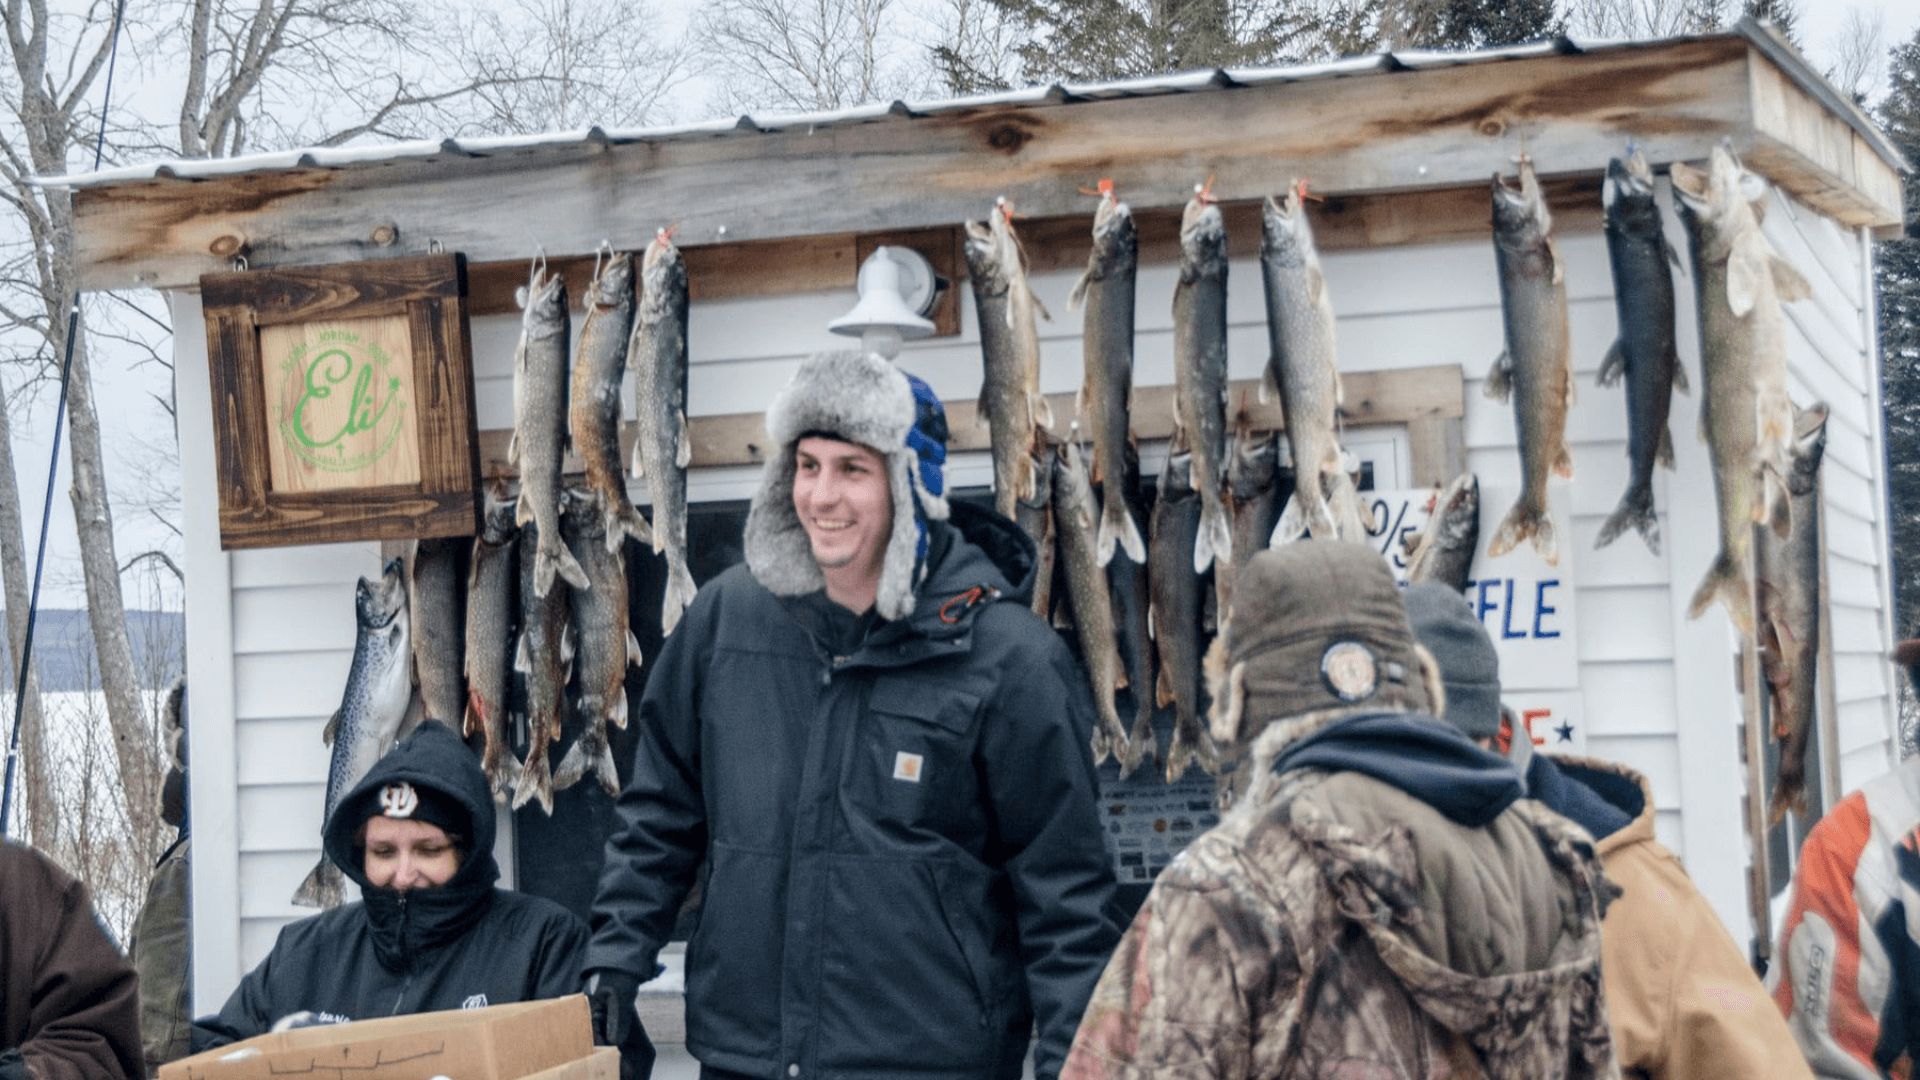 Honoring a legacy: Get Kids Outdoors hosts inaugural ice fishing event in  memory of Crookston pilot - Grand Forks Herald